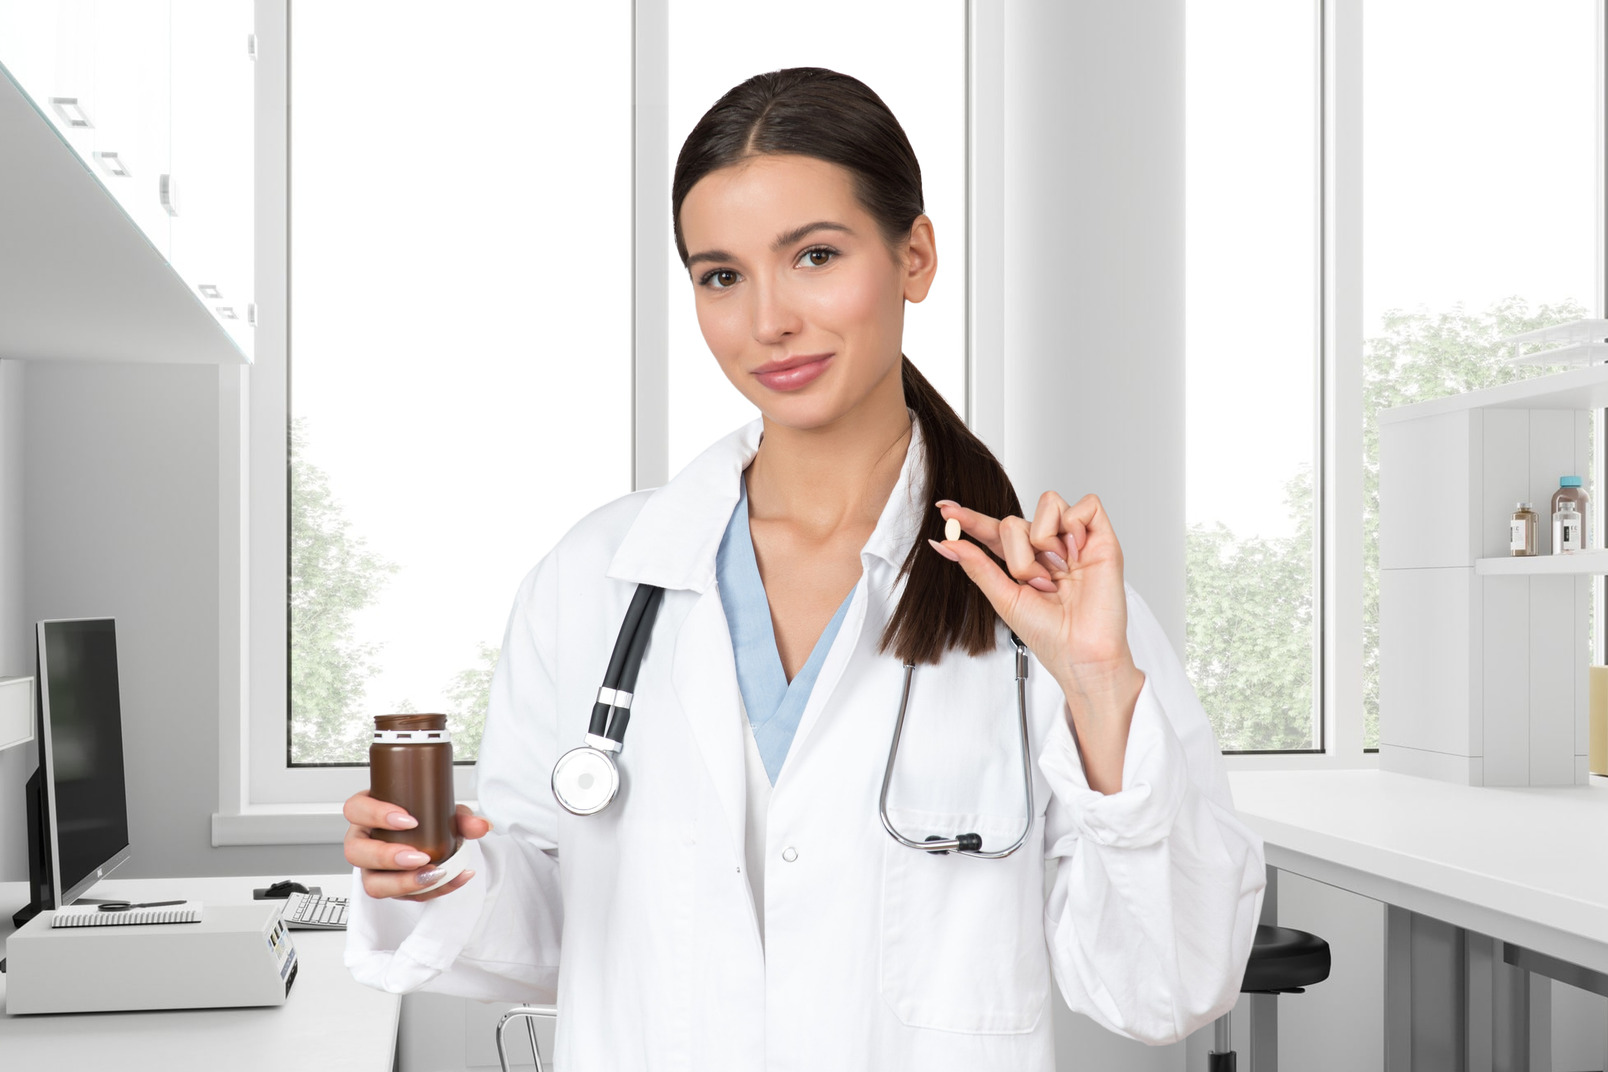 A female doctor standing in a medical office and holding pills